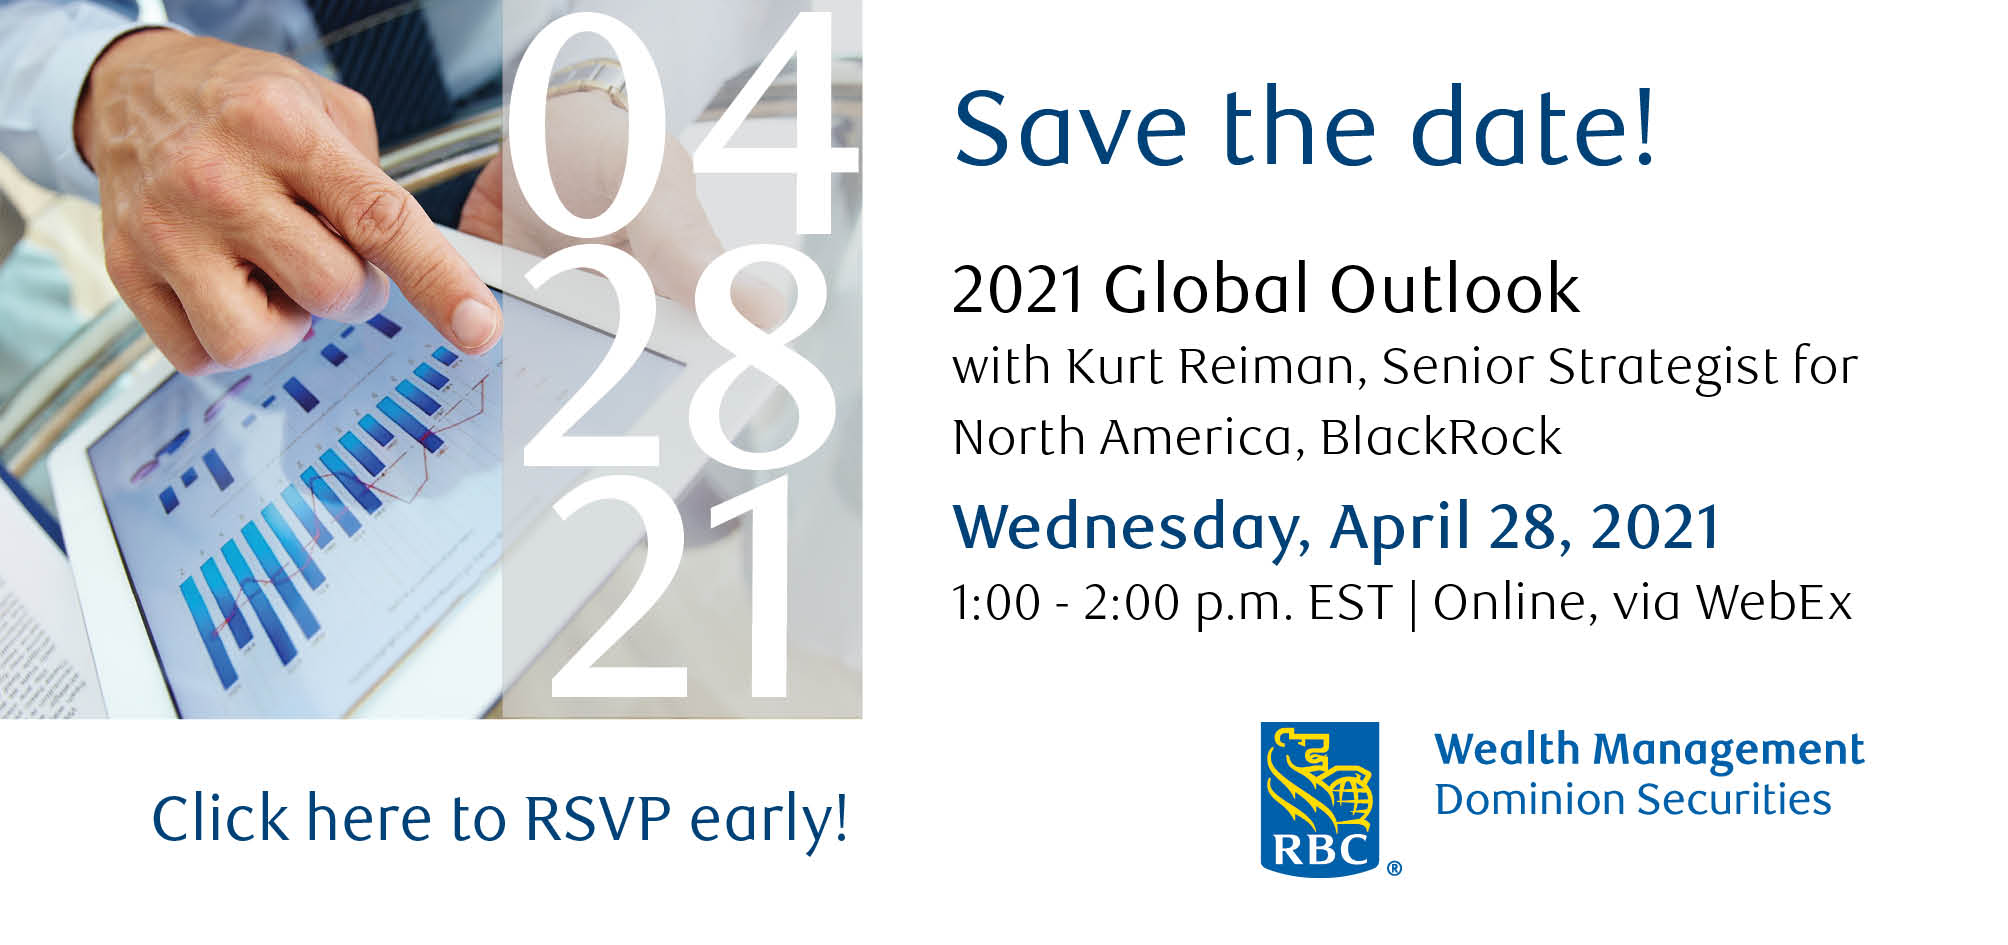 Hyperlink image to RSVP Email. Image shows man holding a tablet and pointing at a graph on the screen. Text over image: Save the Date. 2021 Global Outlook with Kurt Reiman, Senior Strategist for North America, Blackrock. April 28, 2021, 1 p.m. - 2 p.m., Online, via WebEx. Click here to RSVP early. Graphic numbers: 04 28 21